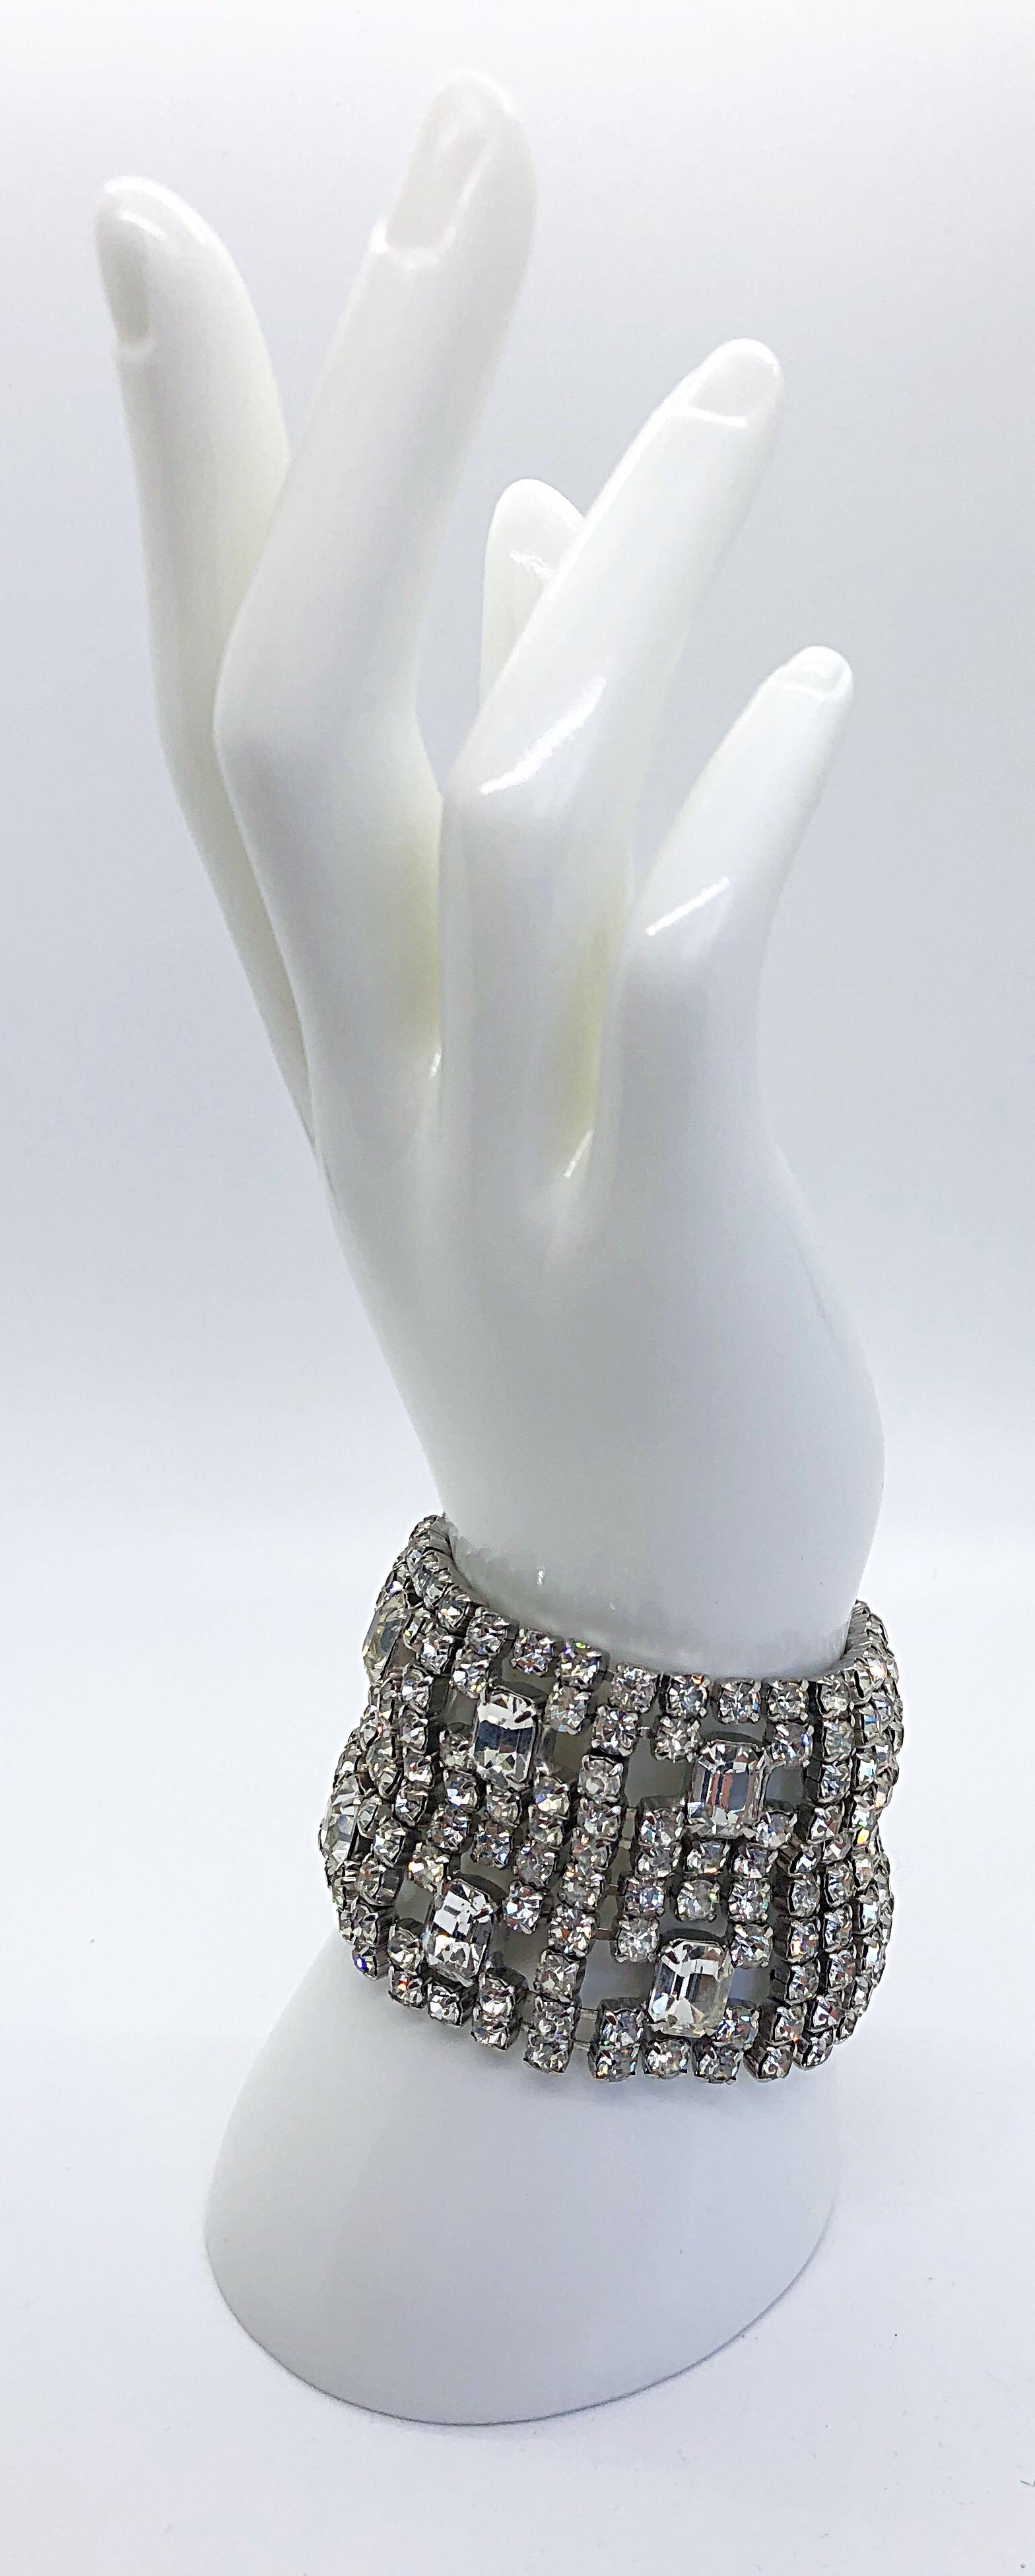 Stunning large rhinestone Hollywood glam bracelet cuff! Add some sparkle to any outfit! Ten rows of rhinestones with six large spread out ones in the center. Intricate etched clasp fastener. Very well made. Can easily be dressed up or down. Great